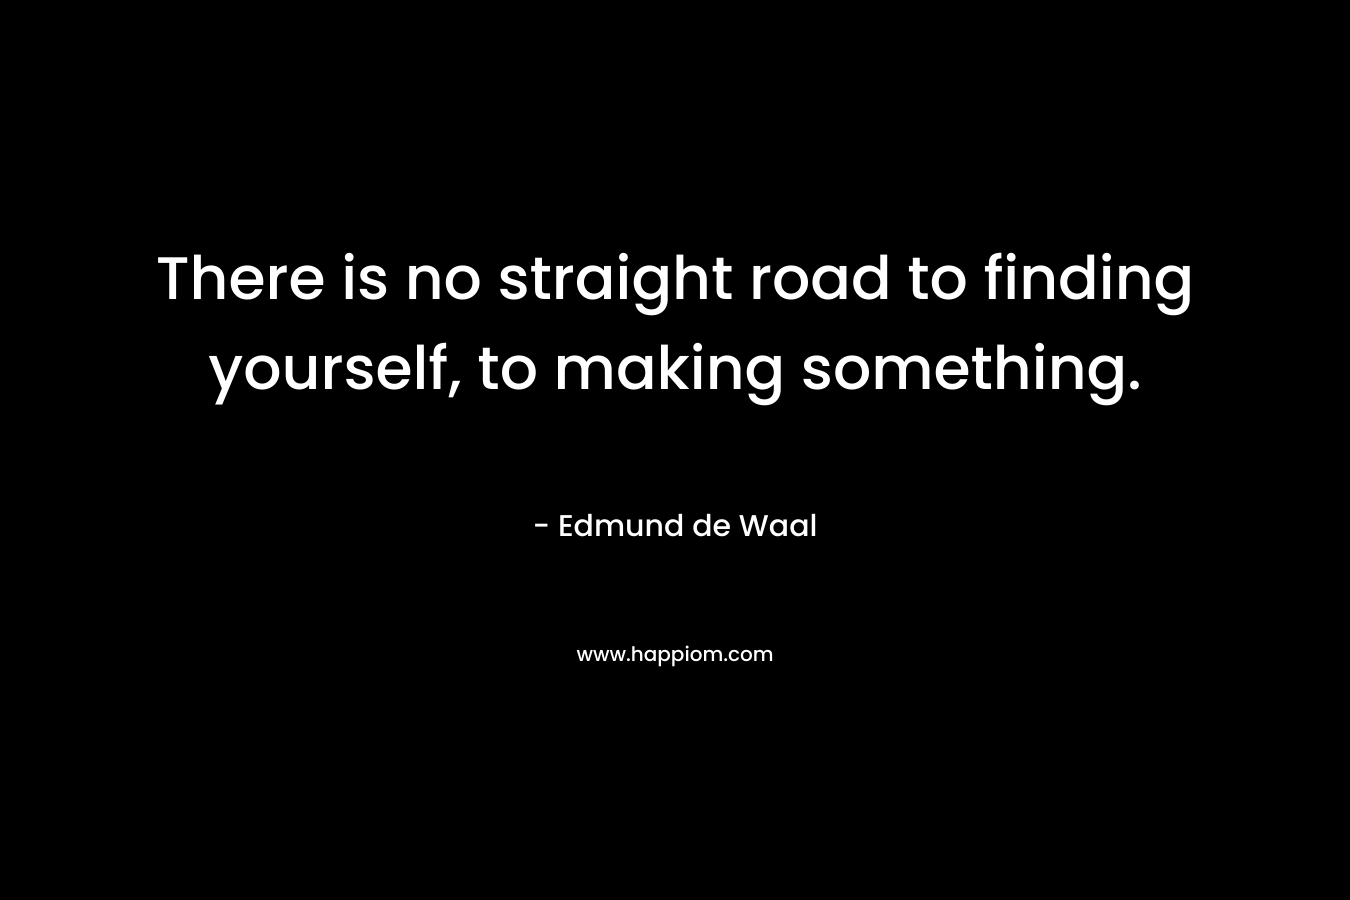 There is no straight road to finding yourself, to making something.